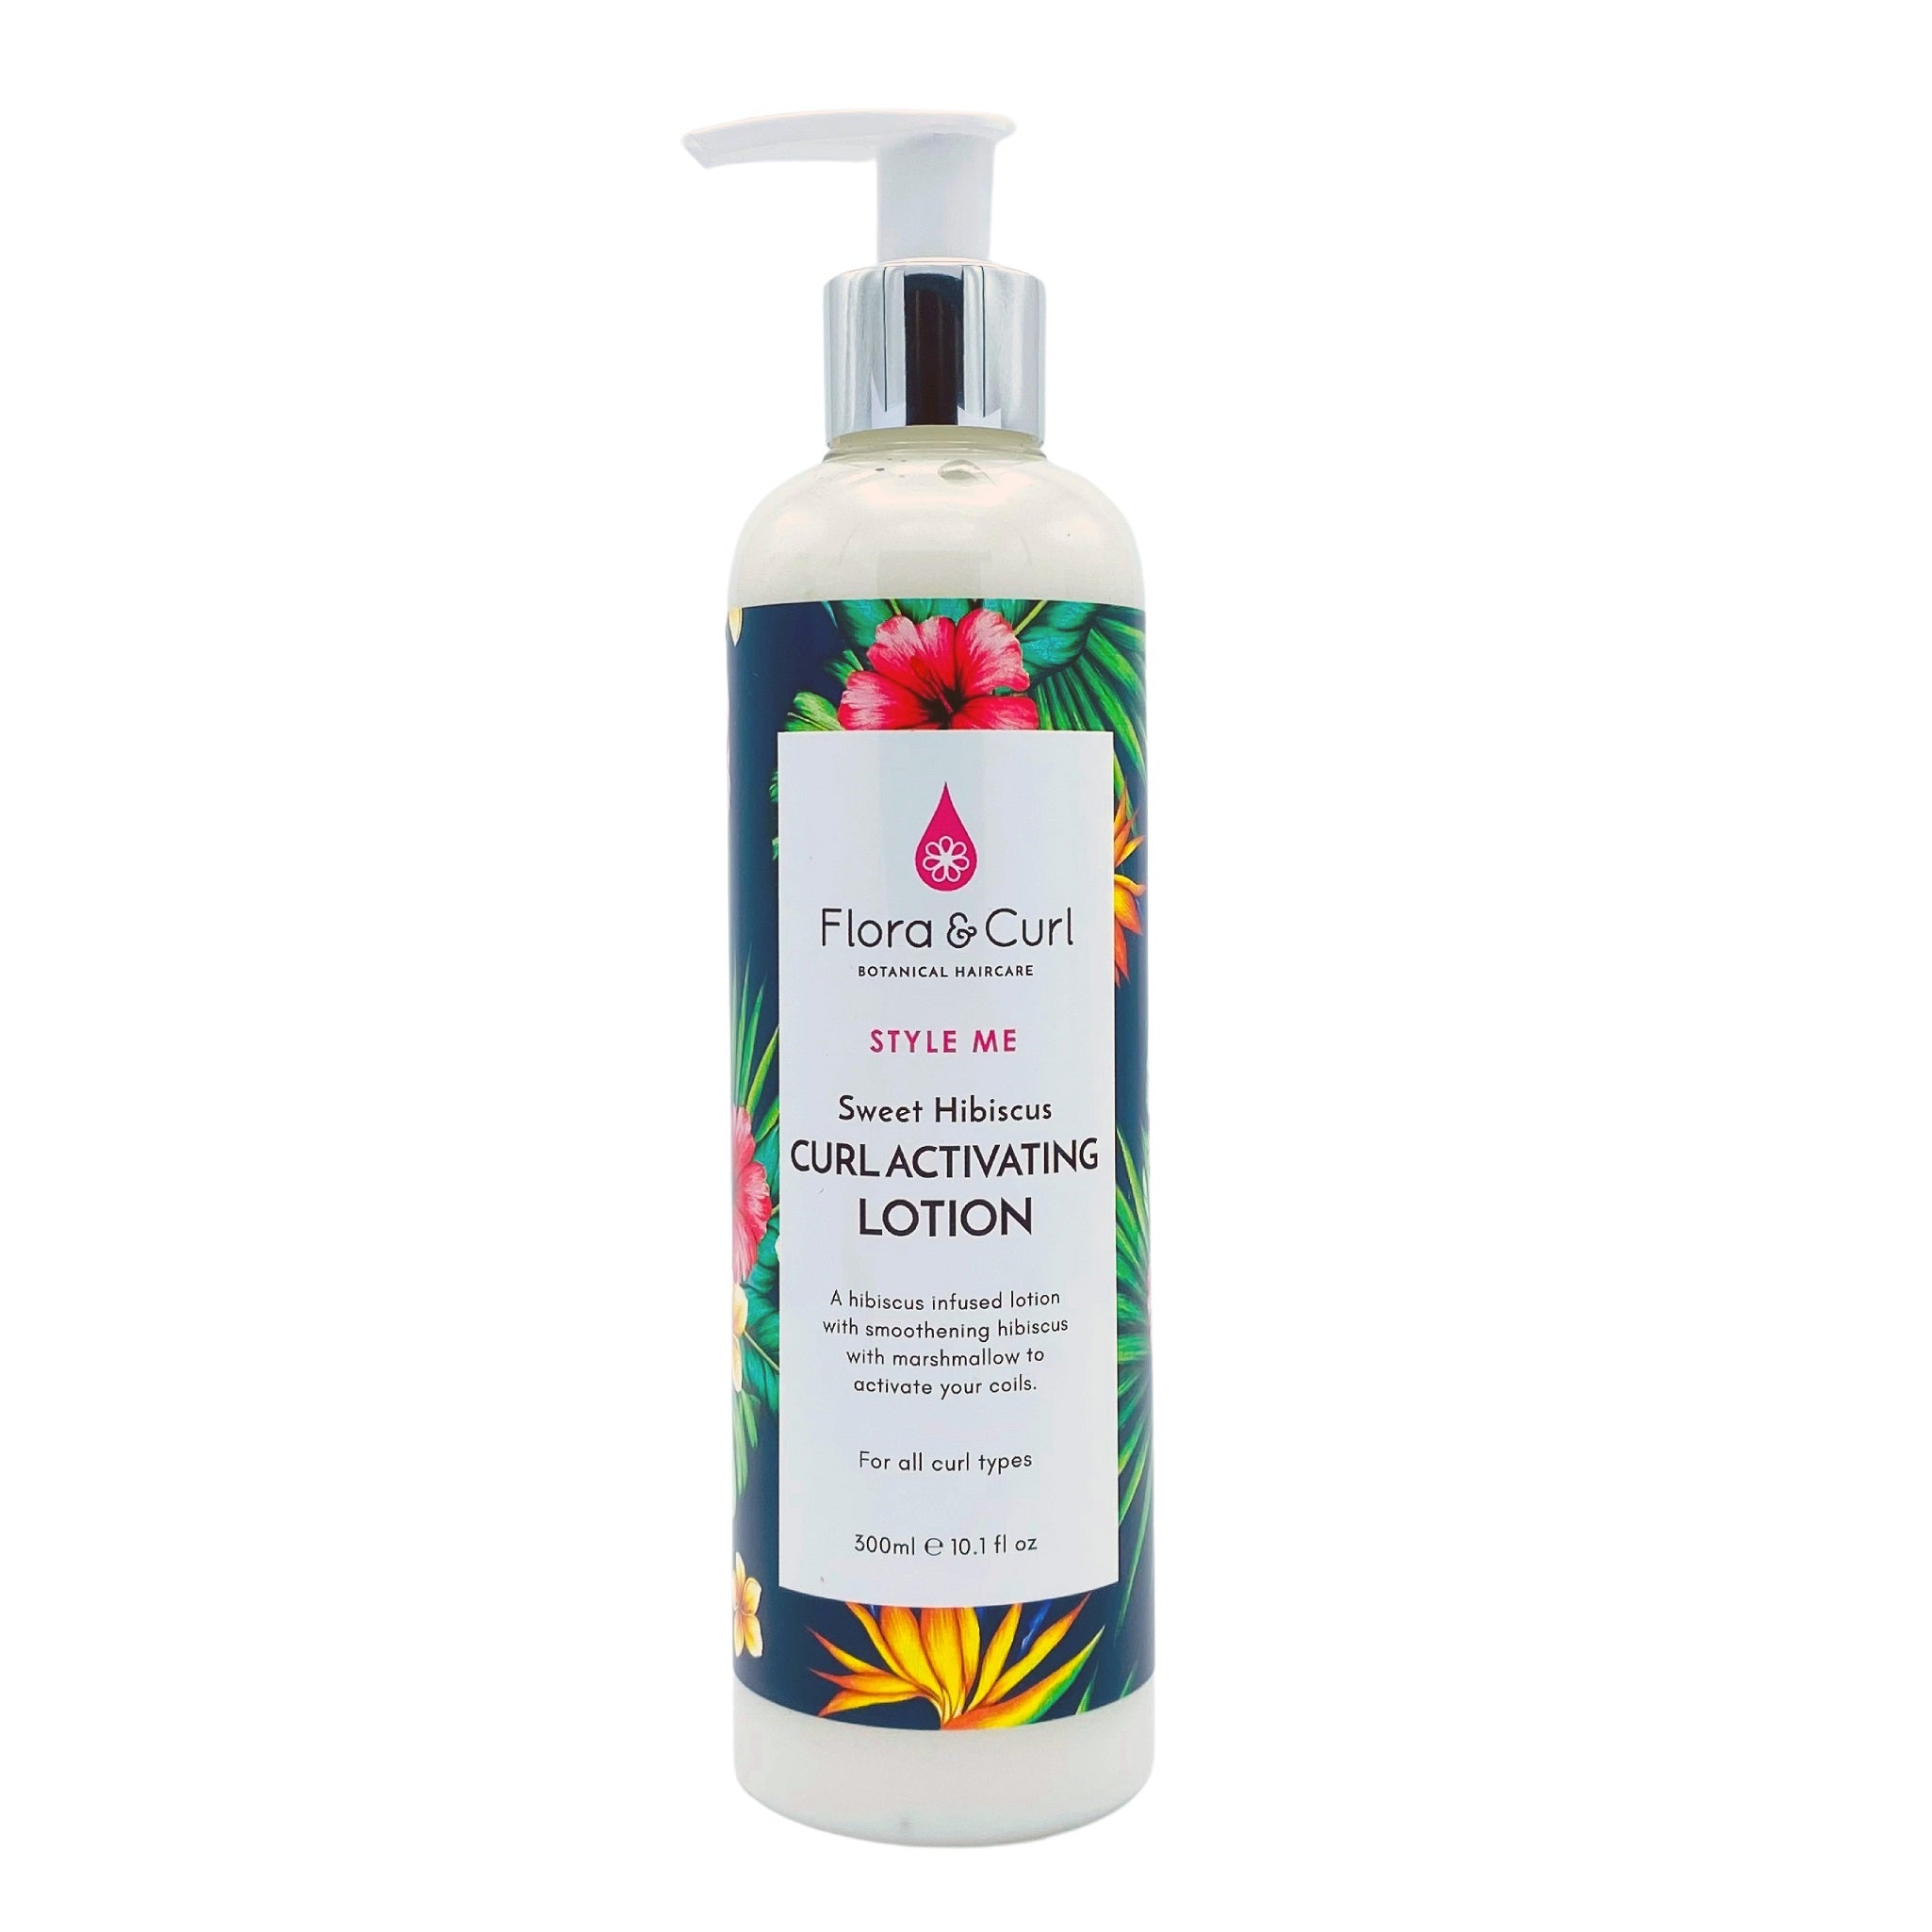 Sweet Hibiscus Curl Activating Lotion